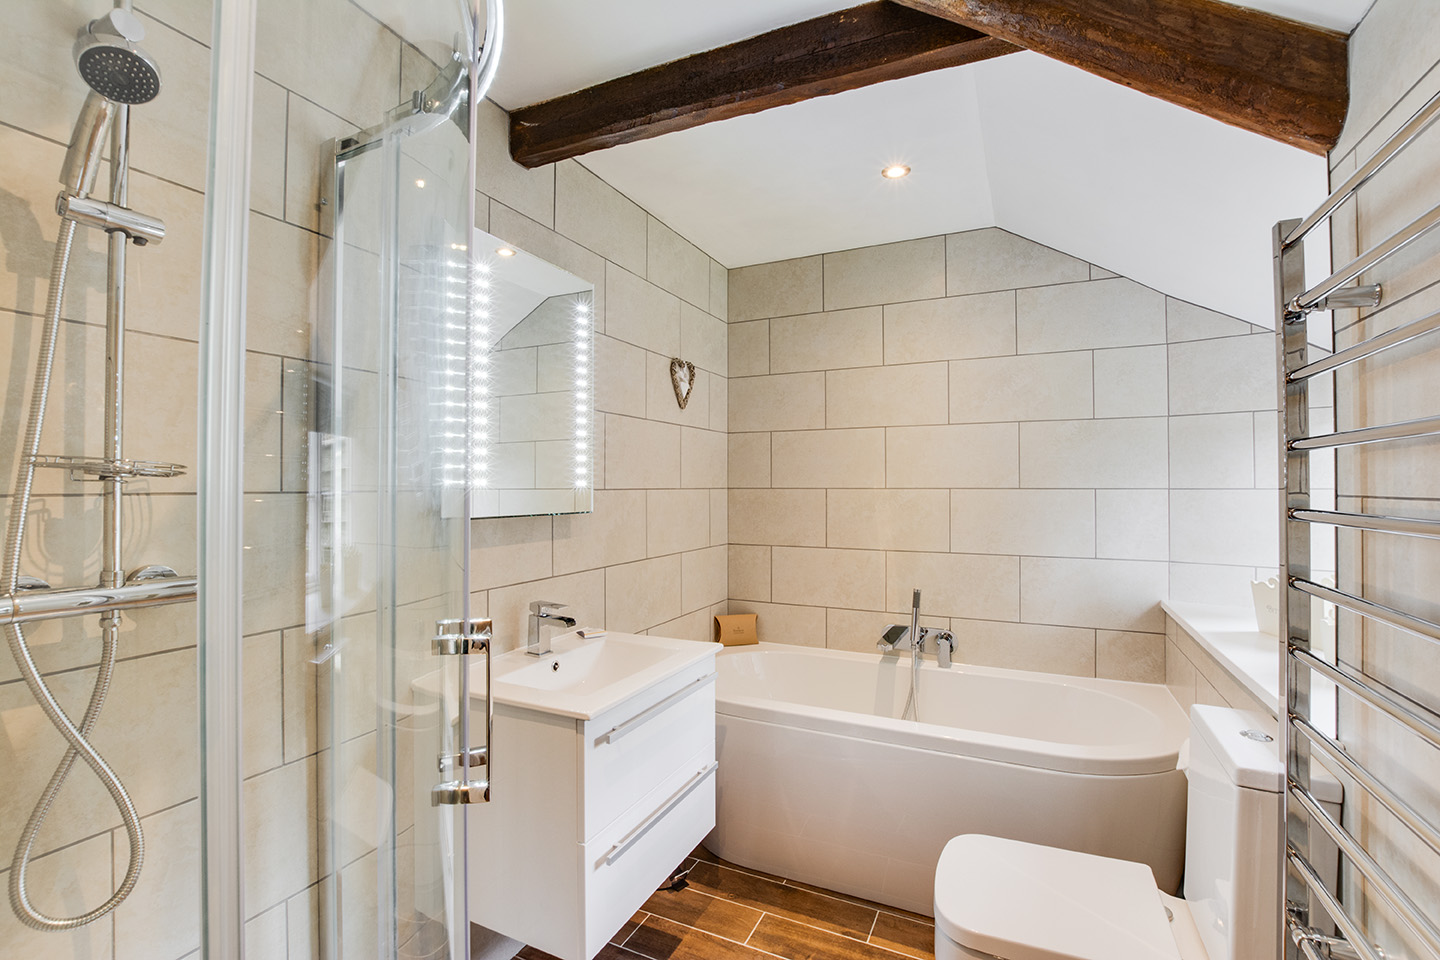 The bathroom of Snappers luxury self catering converted barn holiday cottage at Penrose Burden in North Cornwall 01.jpg